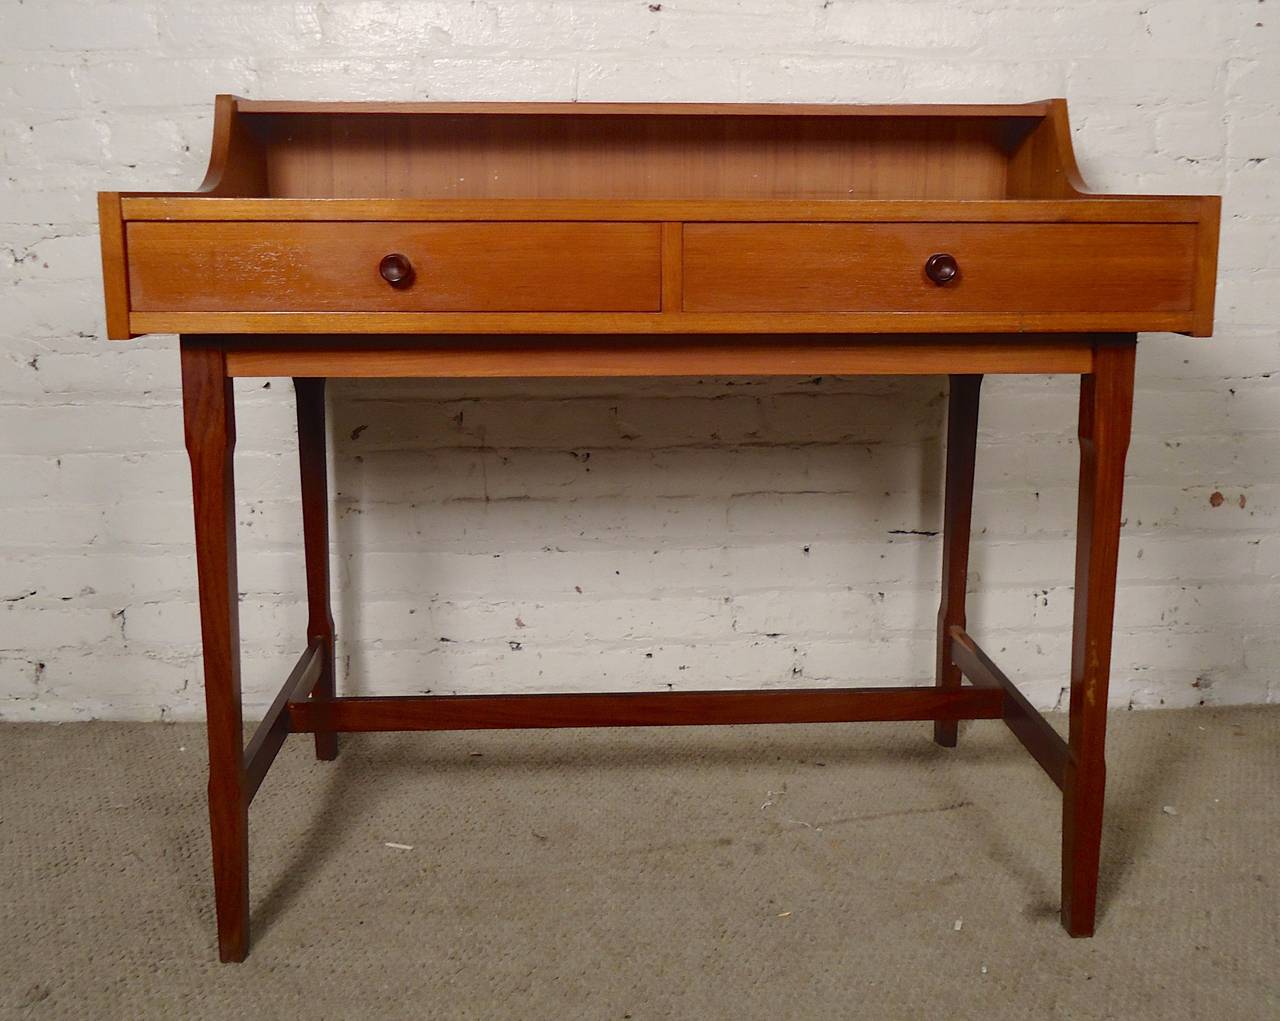 Miniature teak desk with finished back. Lovely teak grain throughout, deep rosewood handles, top shelf, two drawers. Great for a small apartment.

(Please confirm item location - NY or NJ - with dealer)